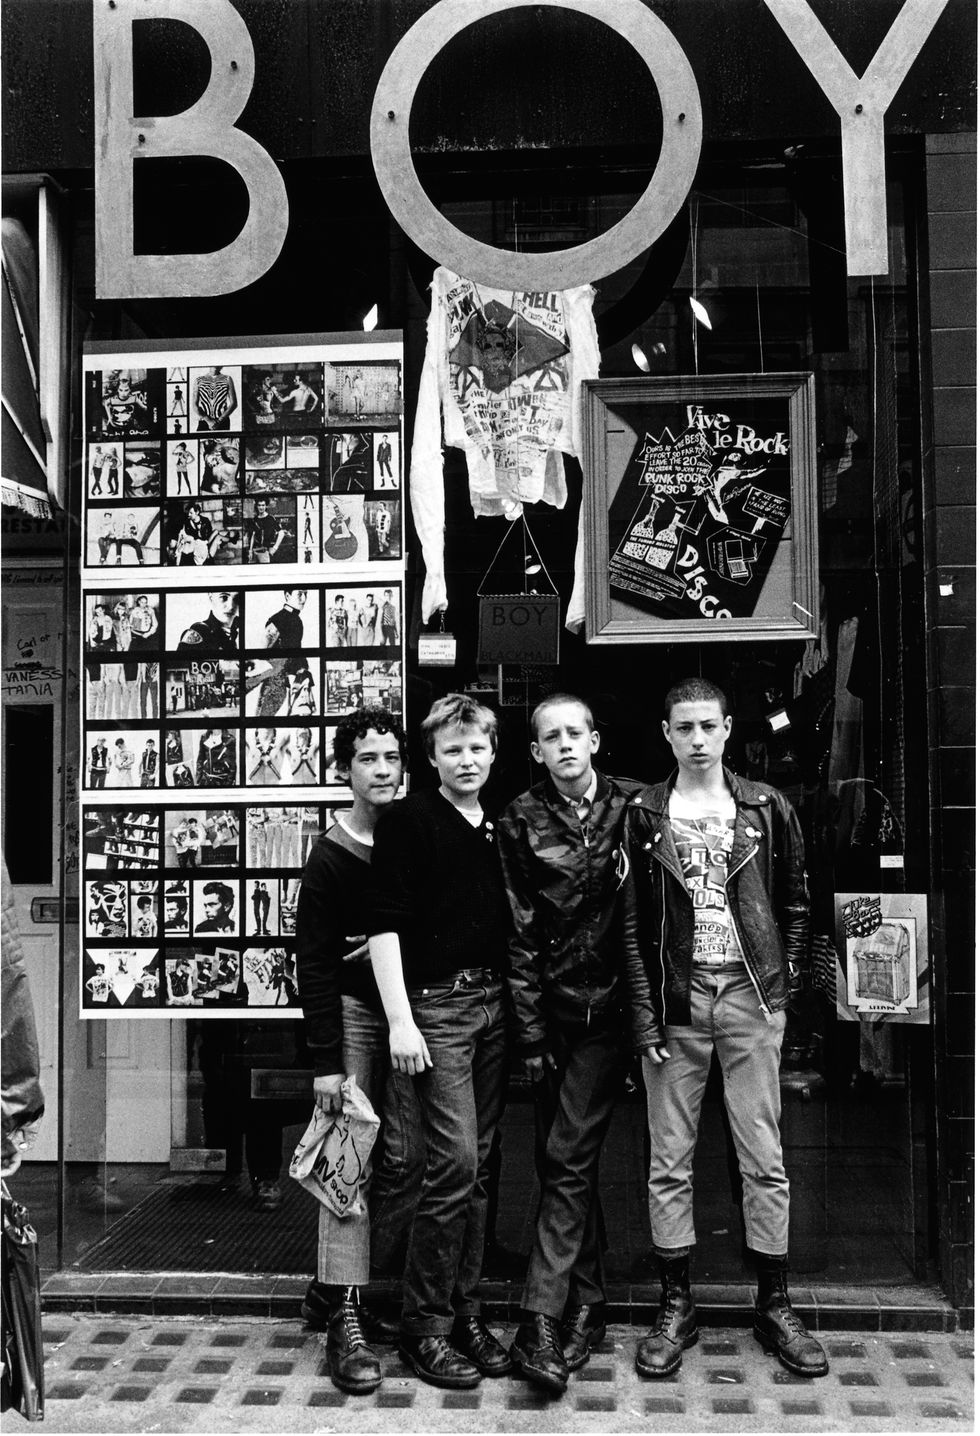 some young punks gather in front of the shop boy on king's road in london, 1979  photo by janette beckmangetty images